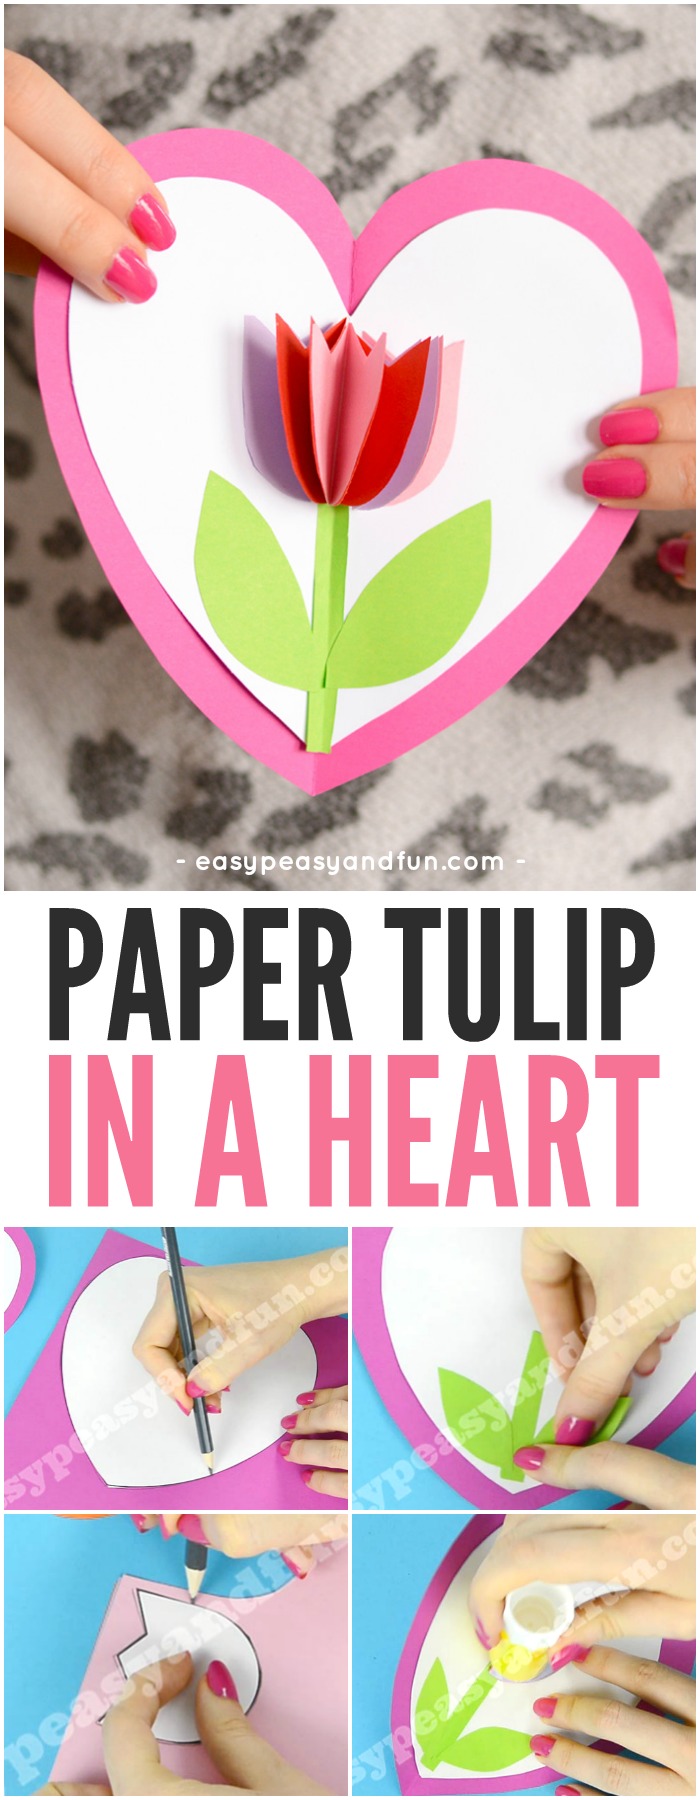 Tulip in a Heart Card Valentines Day Craft for Kids #mothersday #papercrafts #heartcrafts